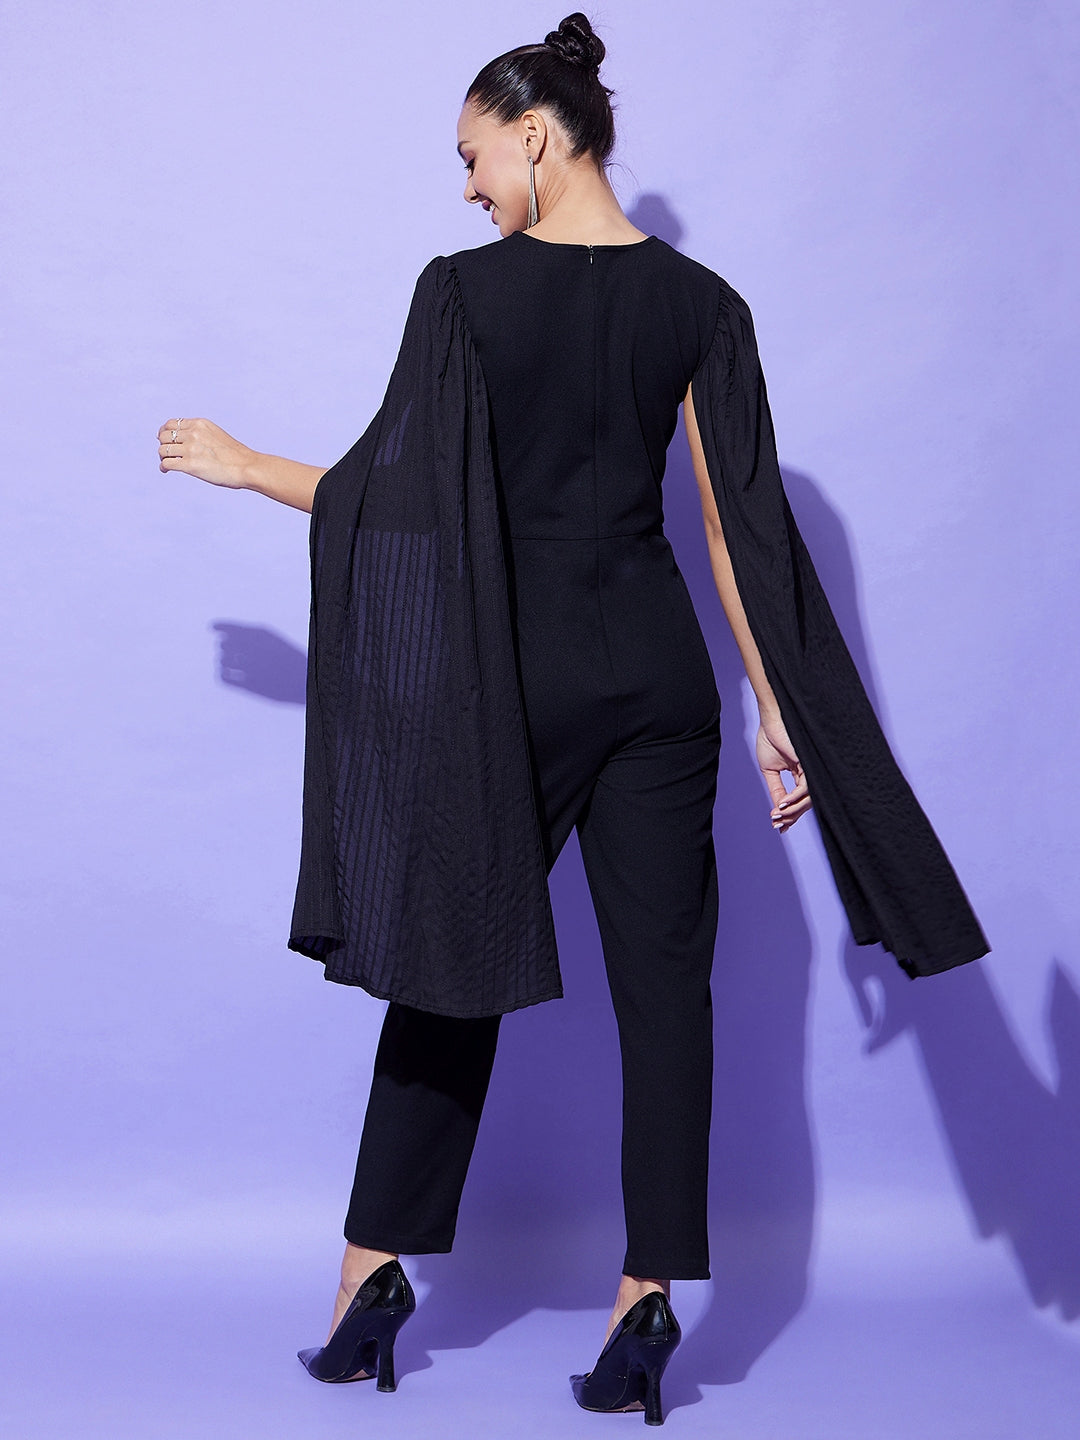 Women's Black Fitted Jumpsuit With Long Cape Sleeves - StyleStone